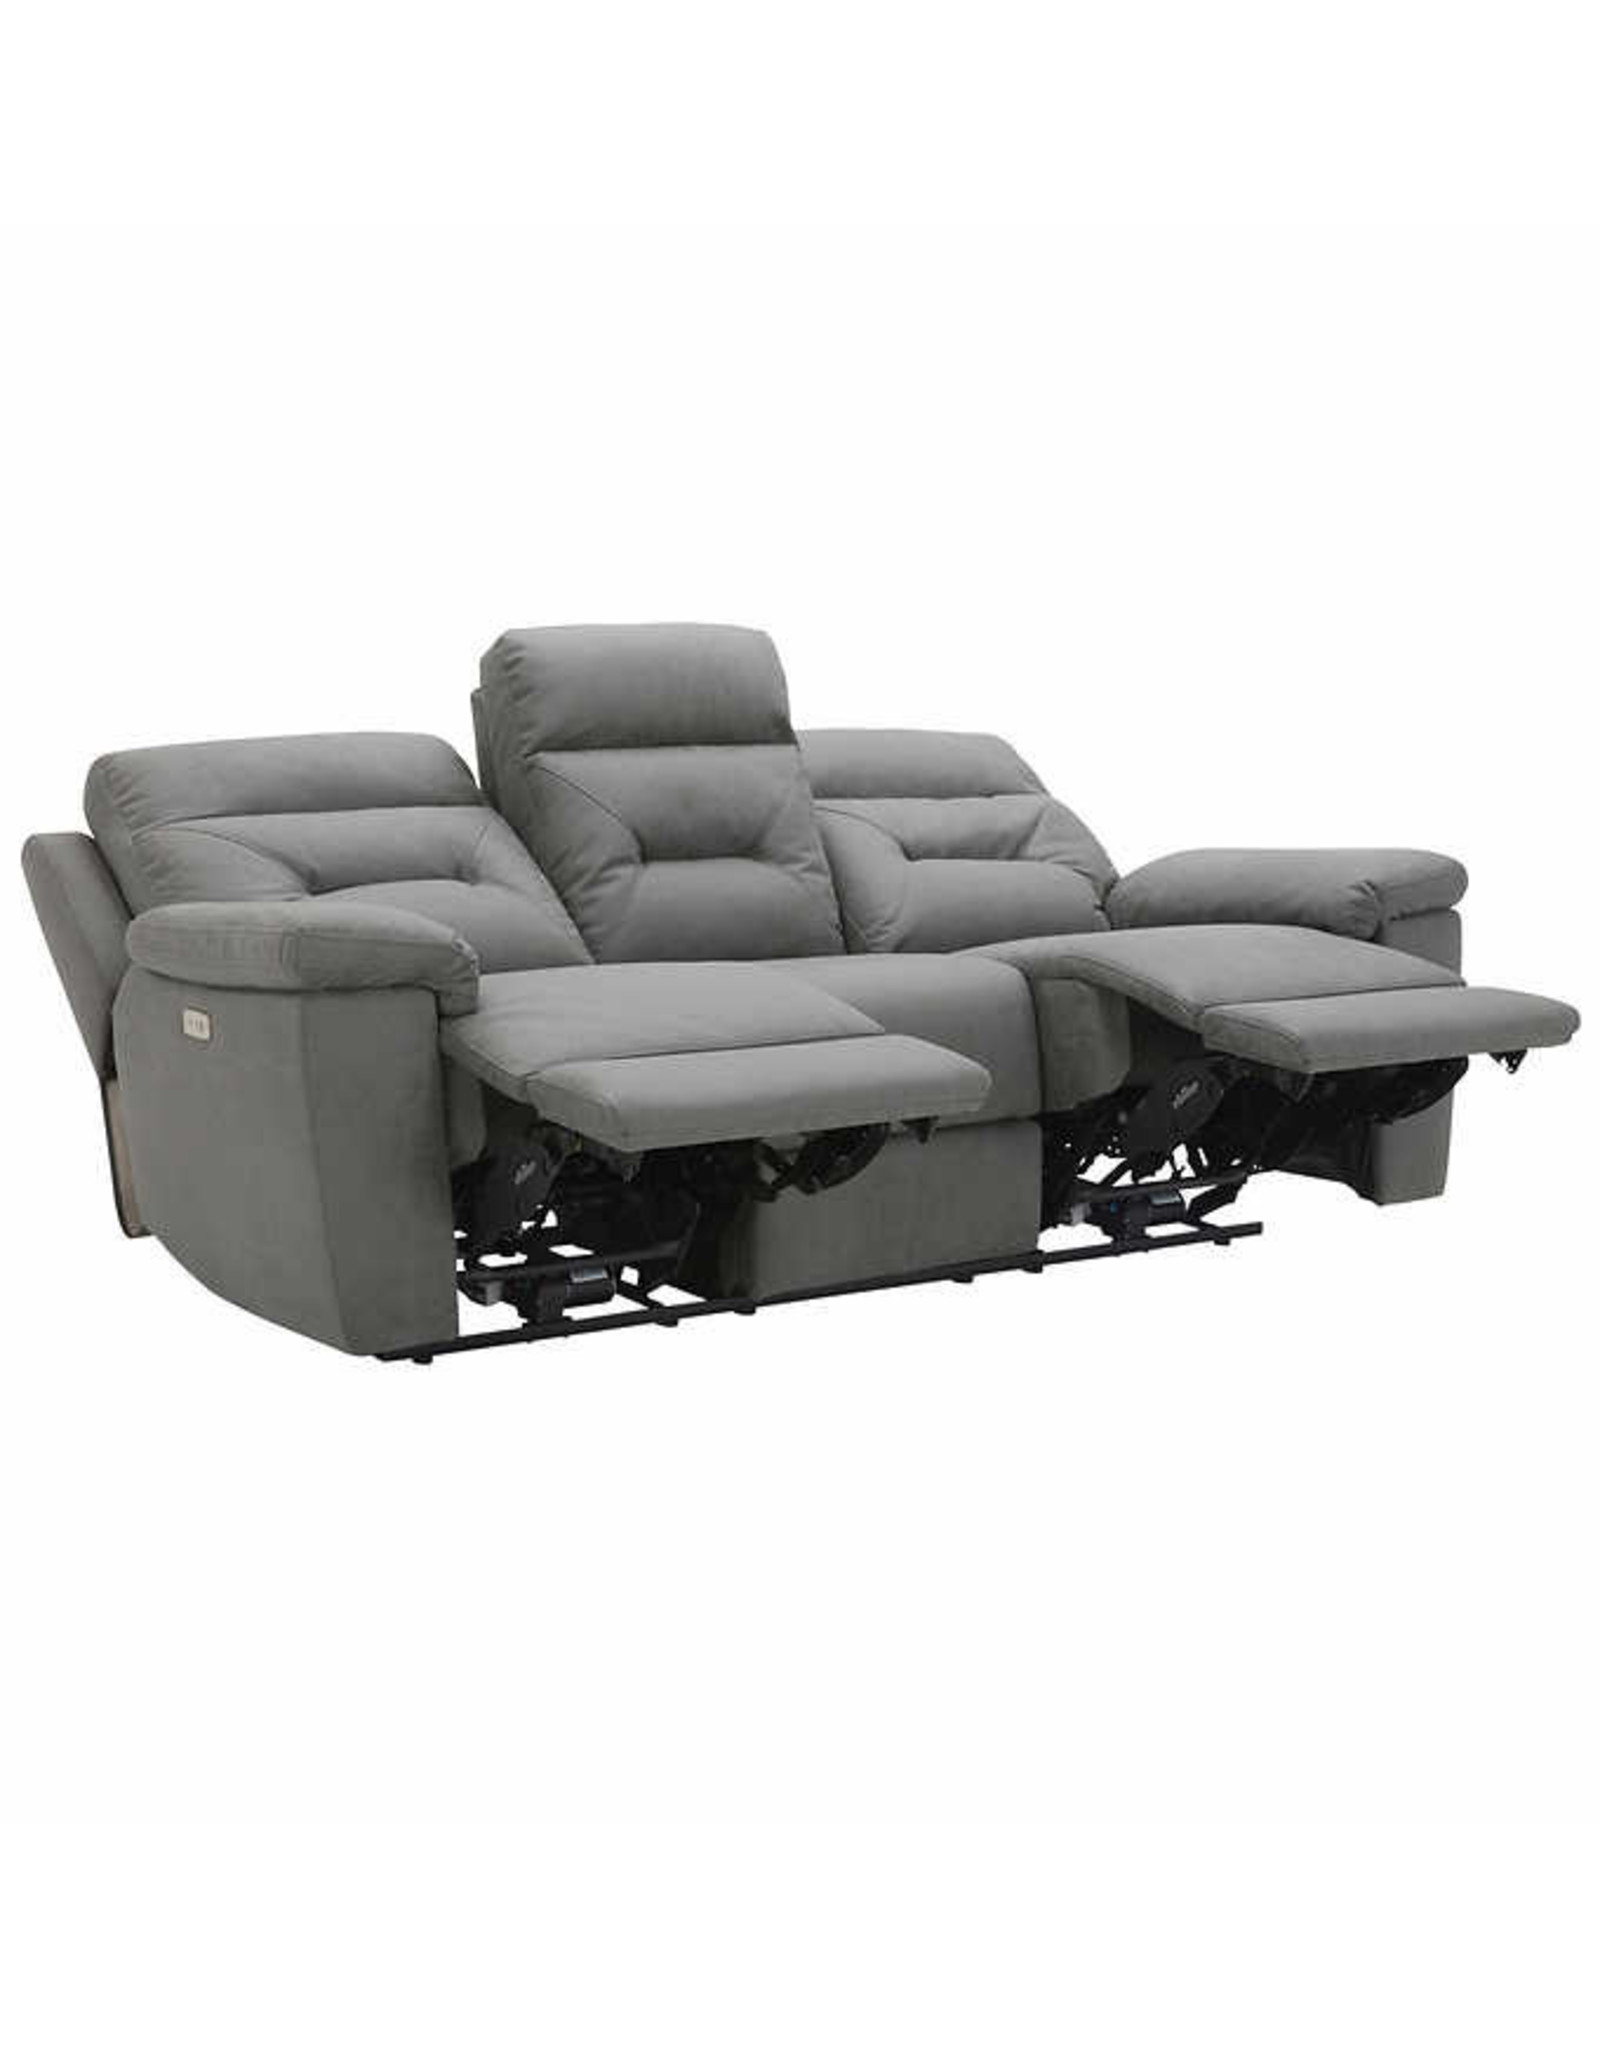 Lawton Fabric Power Reclining Sofa with Power Headrests